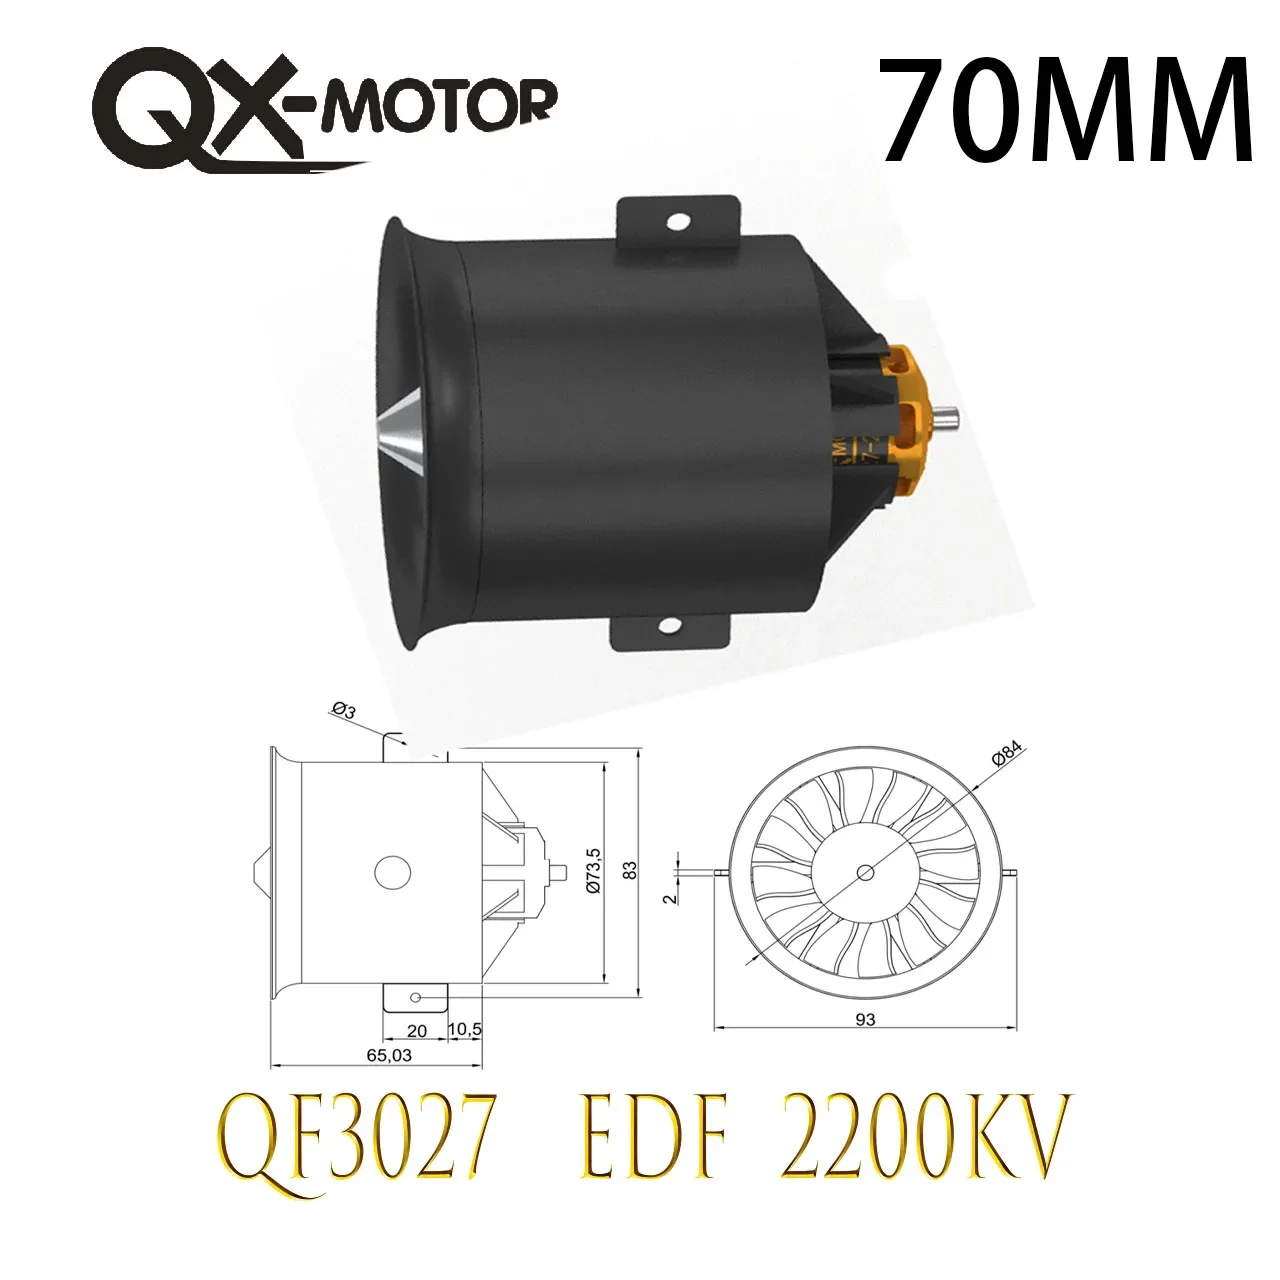 

QX-Motor 70mm EDF 12 Blades Ducted Fan QF3027 -2200kv CW CCW Brushless Motor for Remote Control Toy Parts